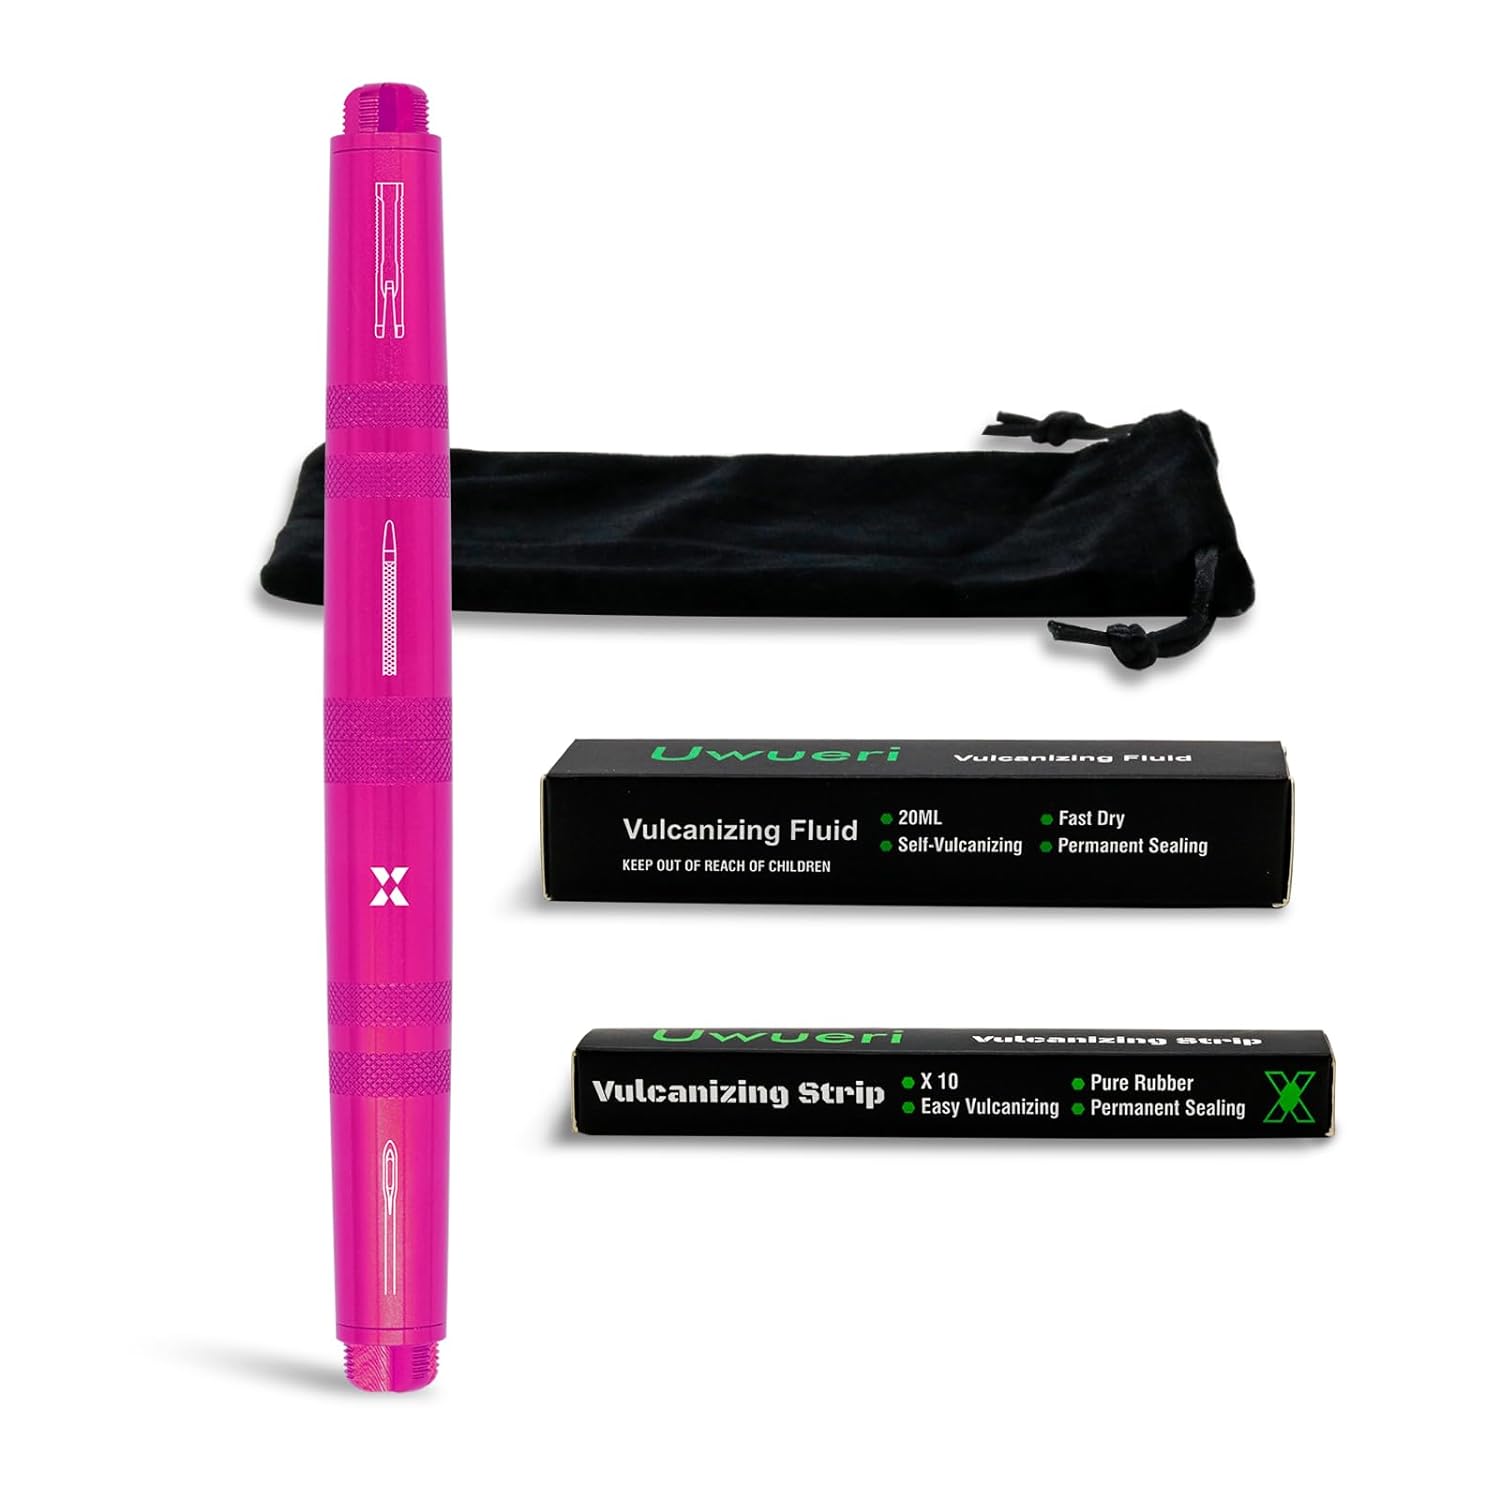 Uwueri Compact Tire Repair Kit for Motorcycle (Pink)